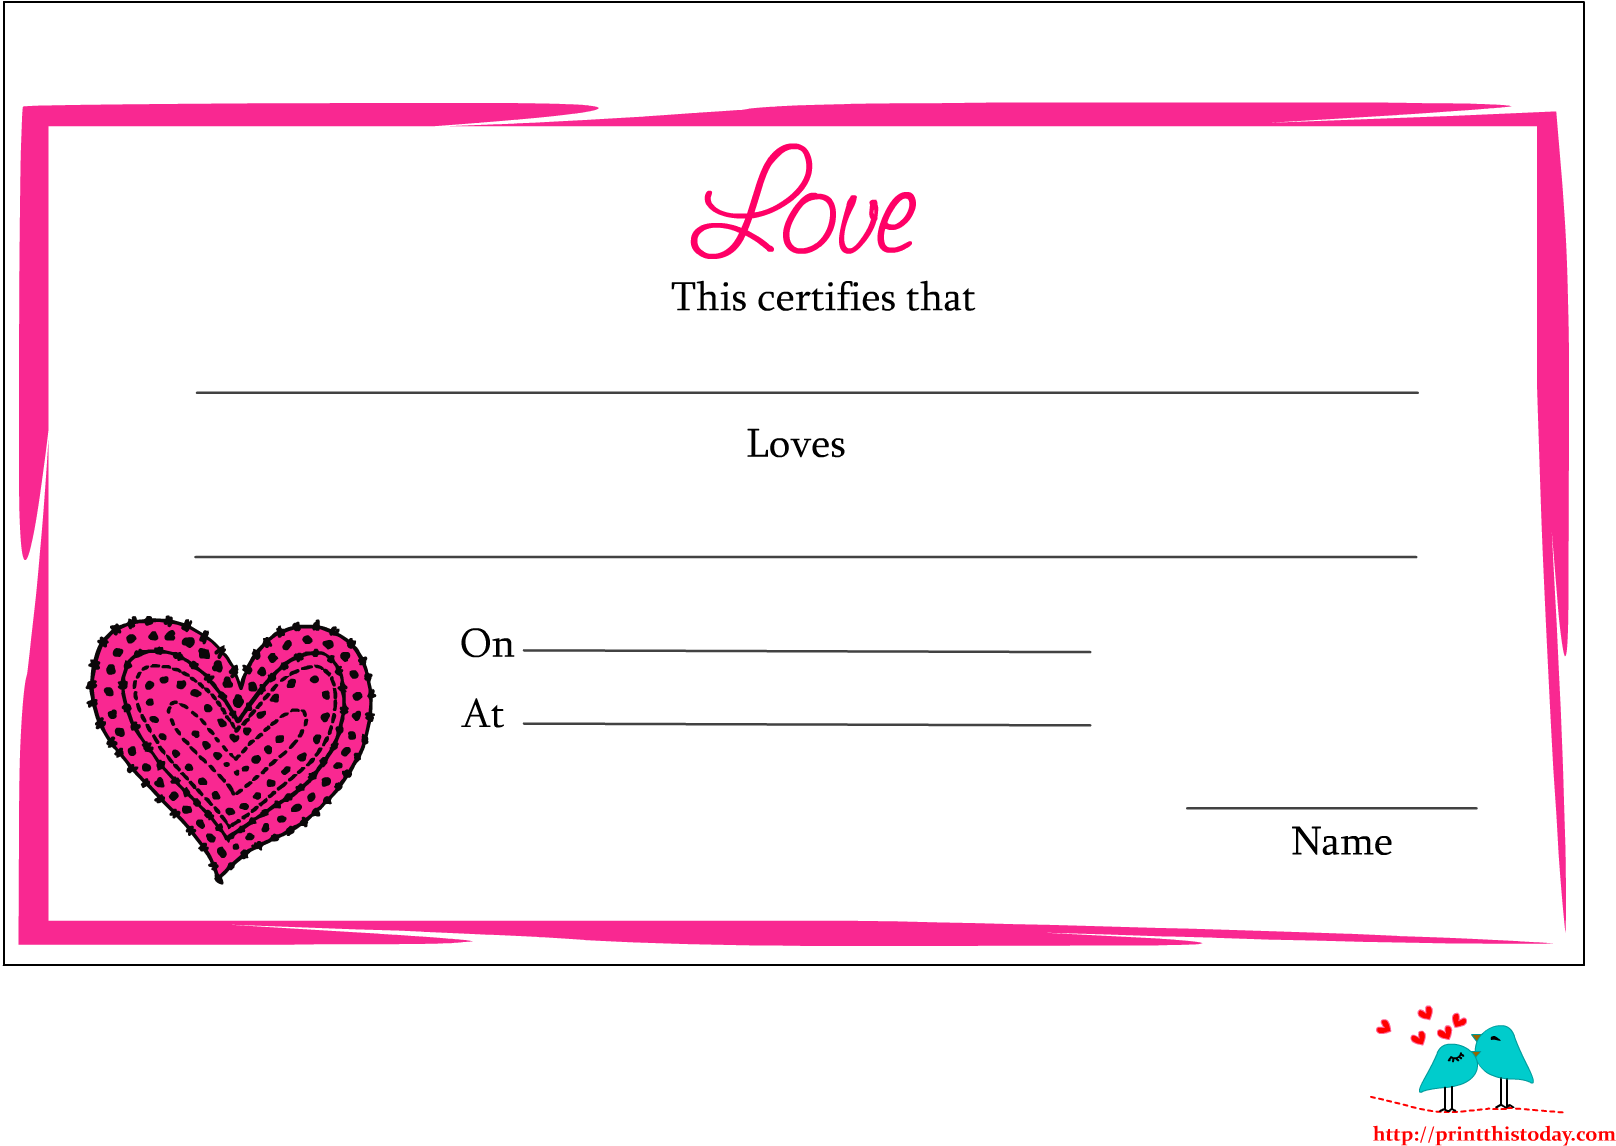 Free Printable Love Certificate - Love Certificates For Boyfriend Within Love Certificate Templates